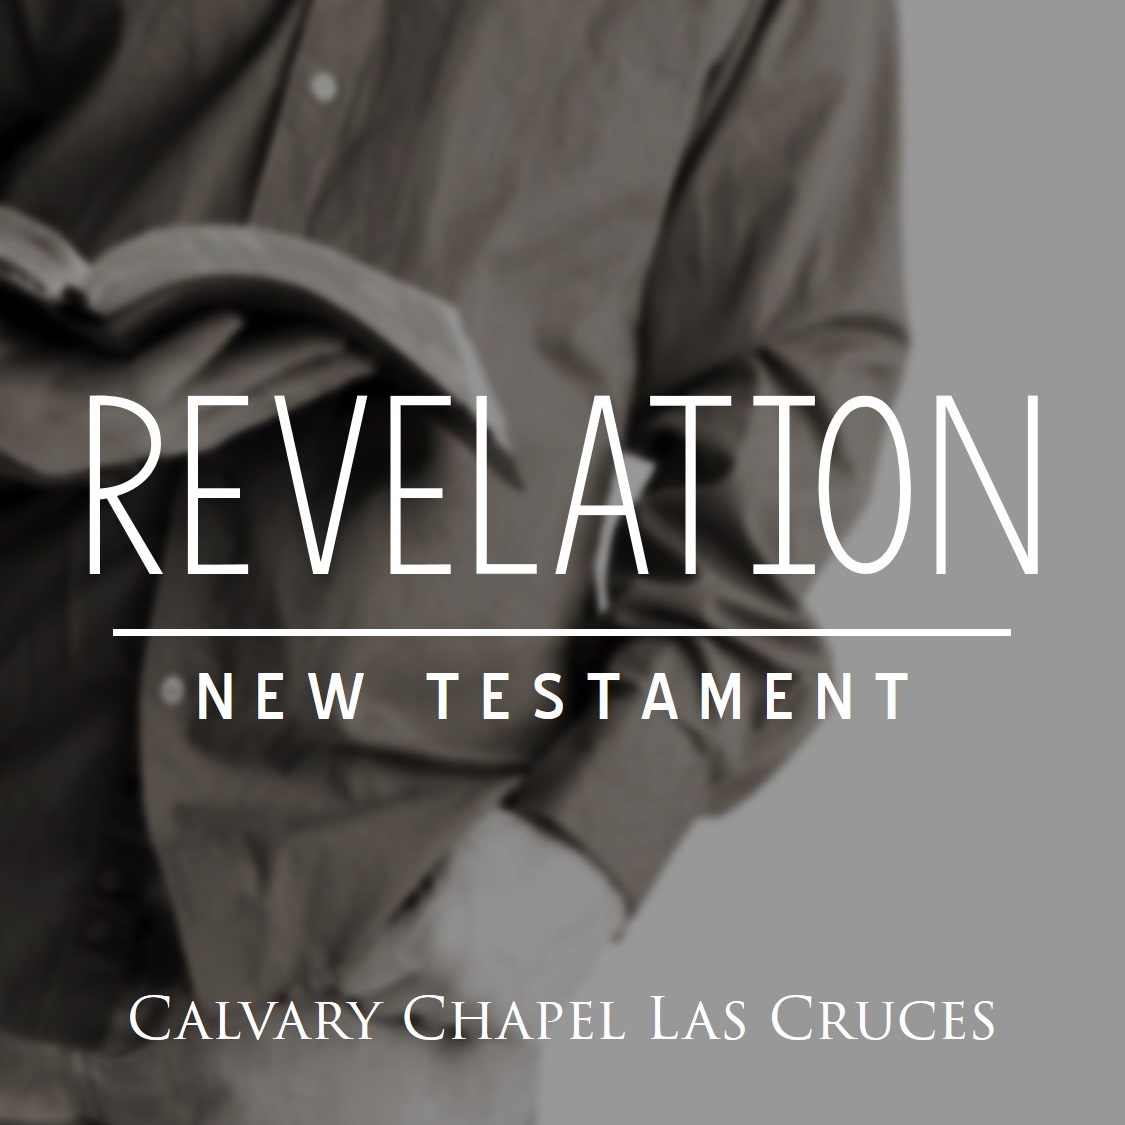 Revelation Chapter 15 - "The Last Plagues Are Coming"